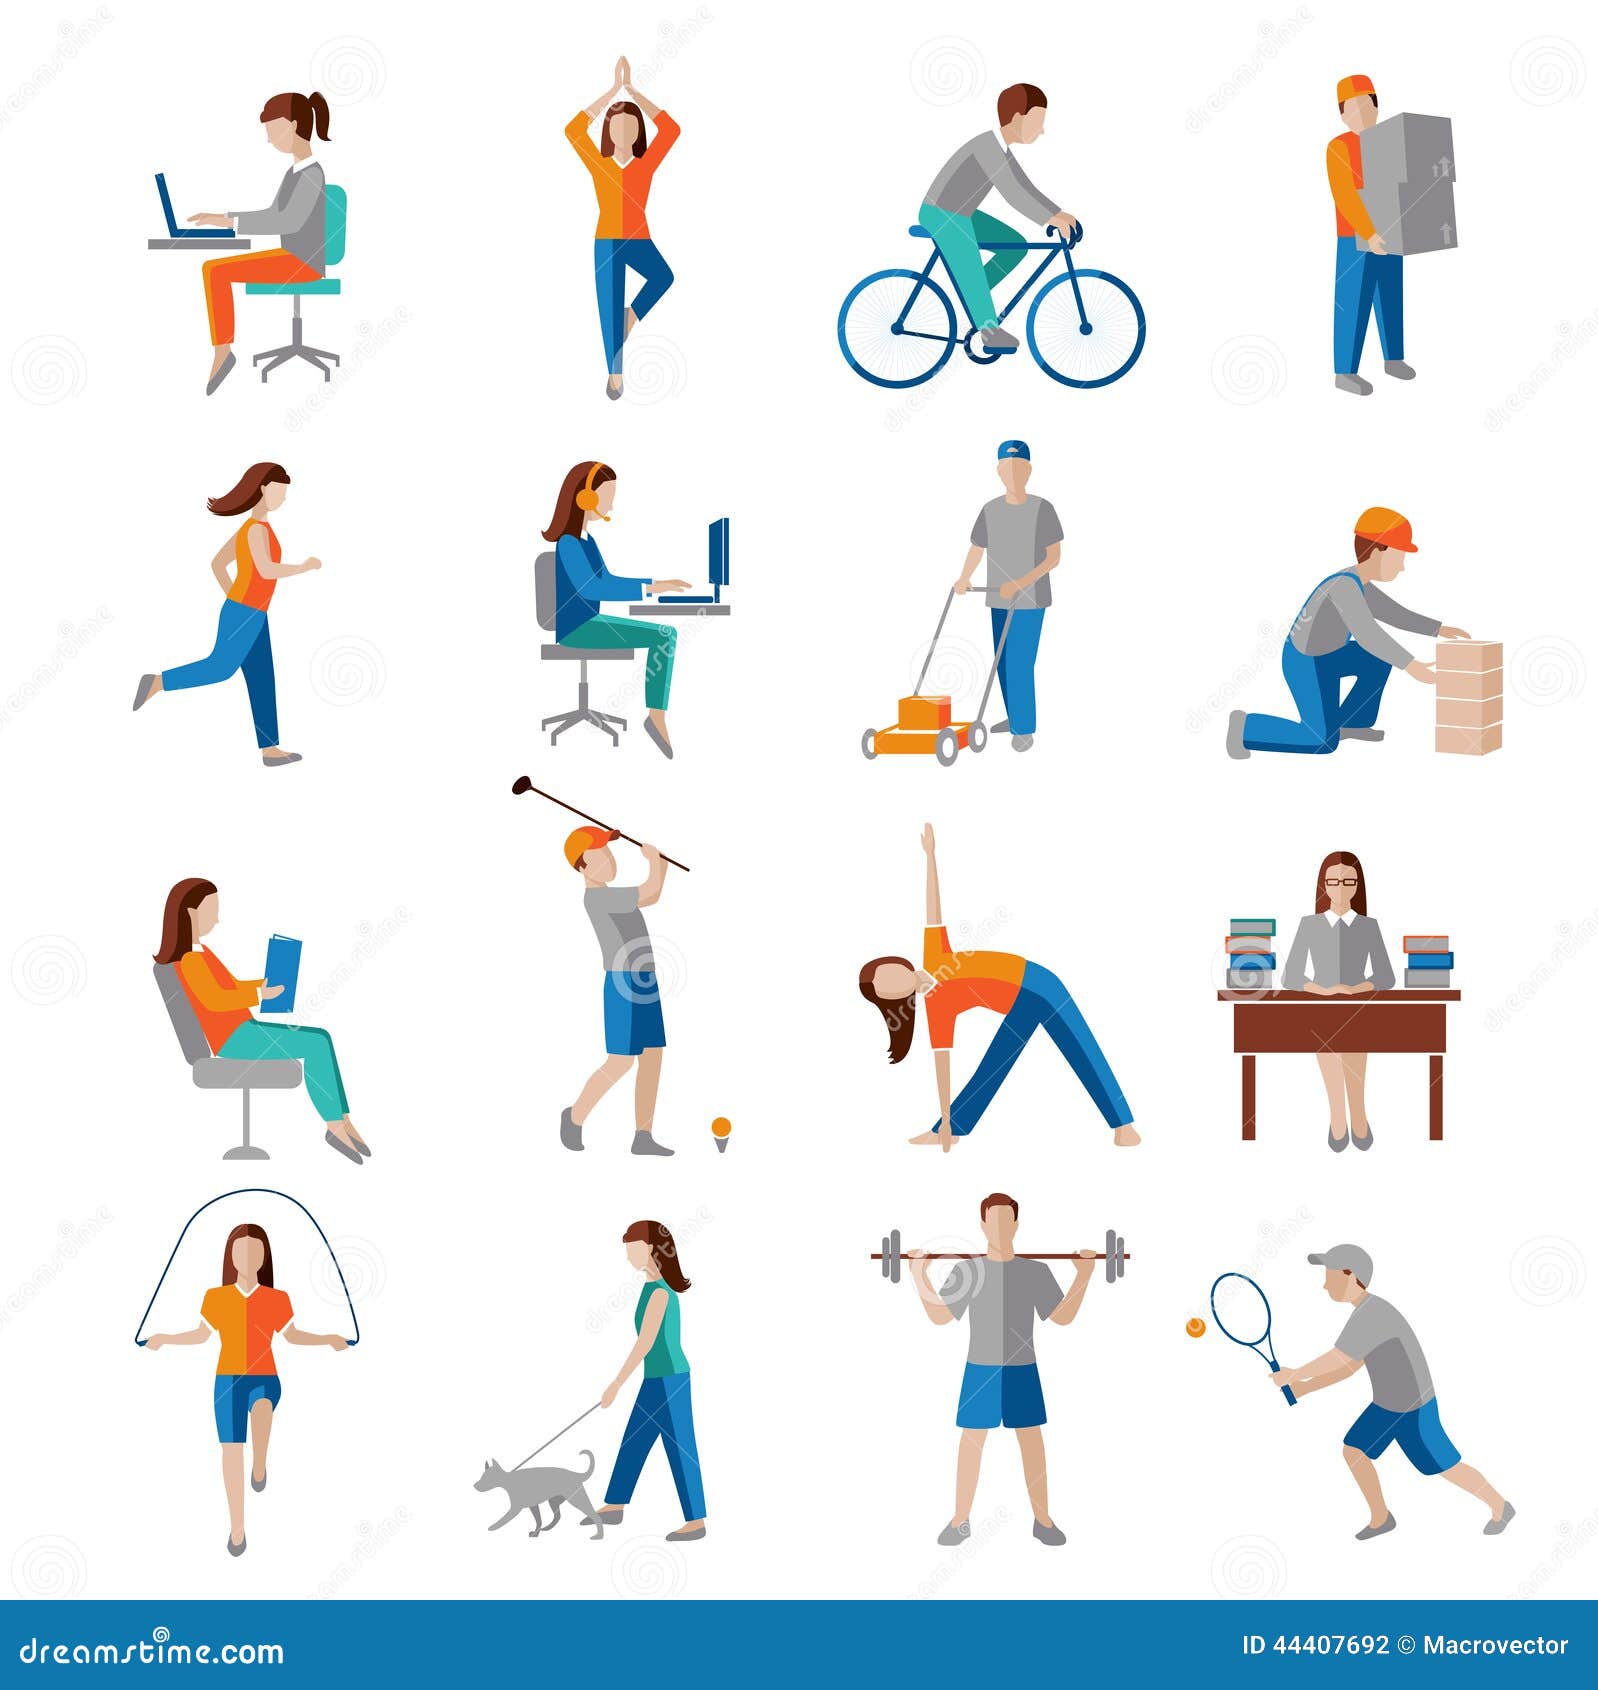 Physical Activity Stock Illustrations – 54,449 Physical Activity